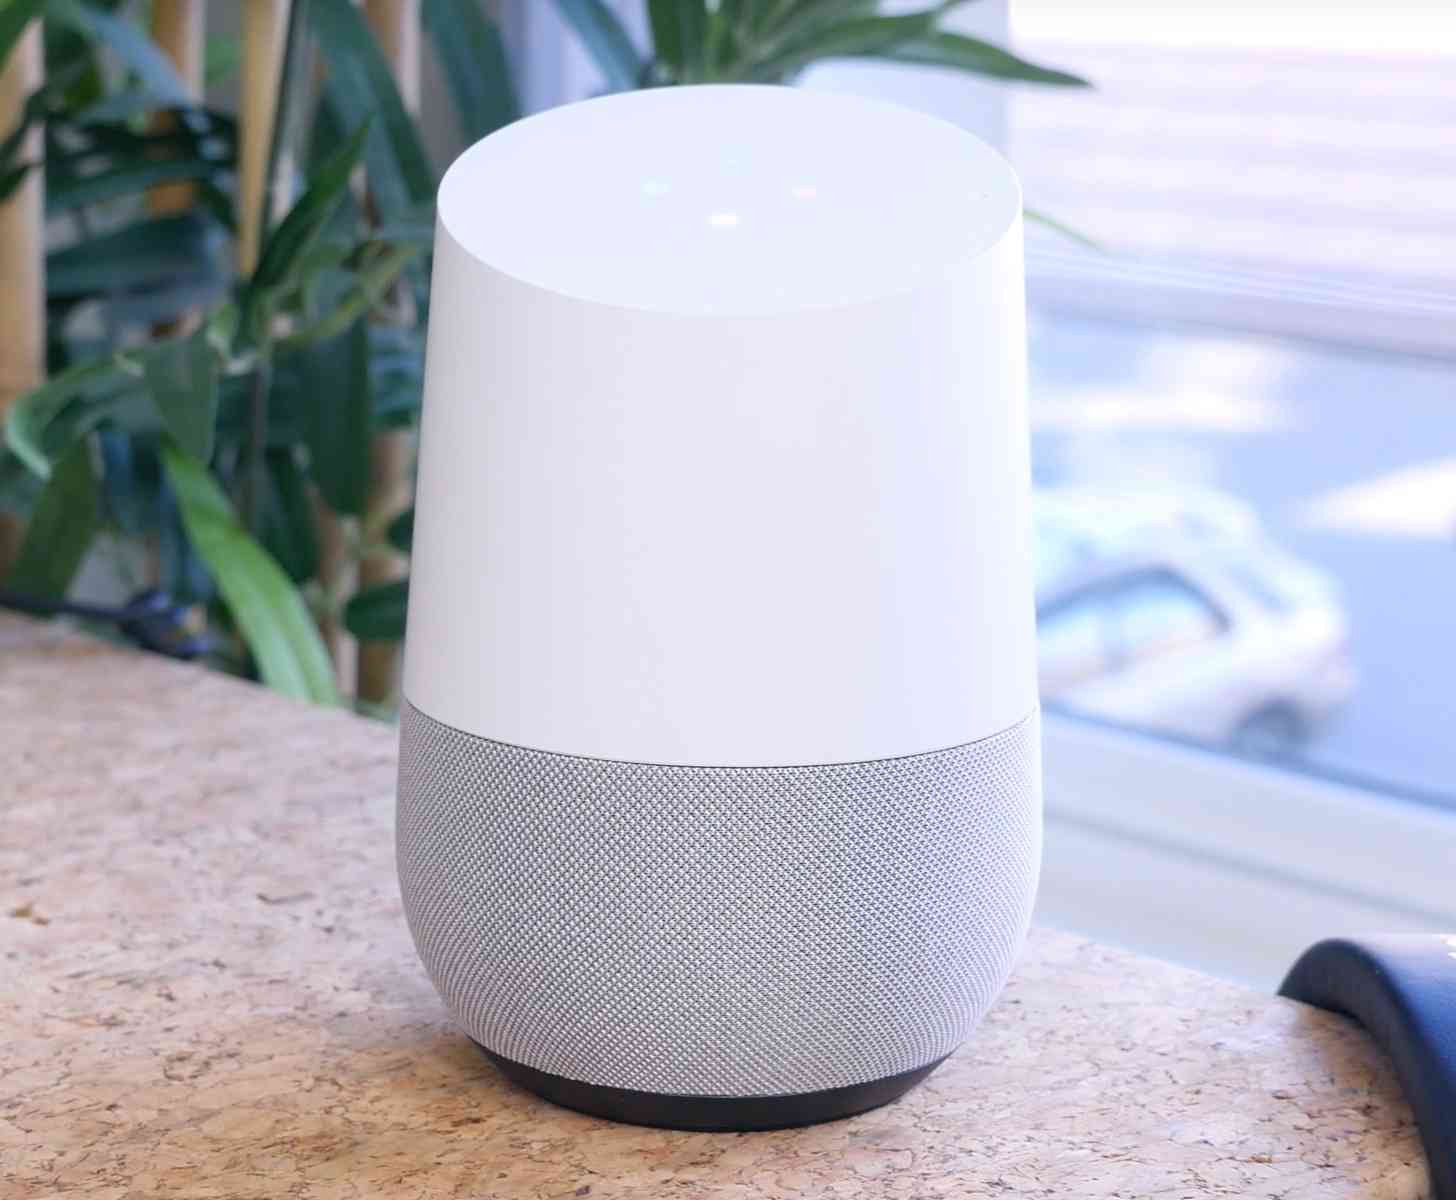 Google Home hands-on video